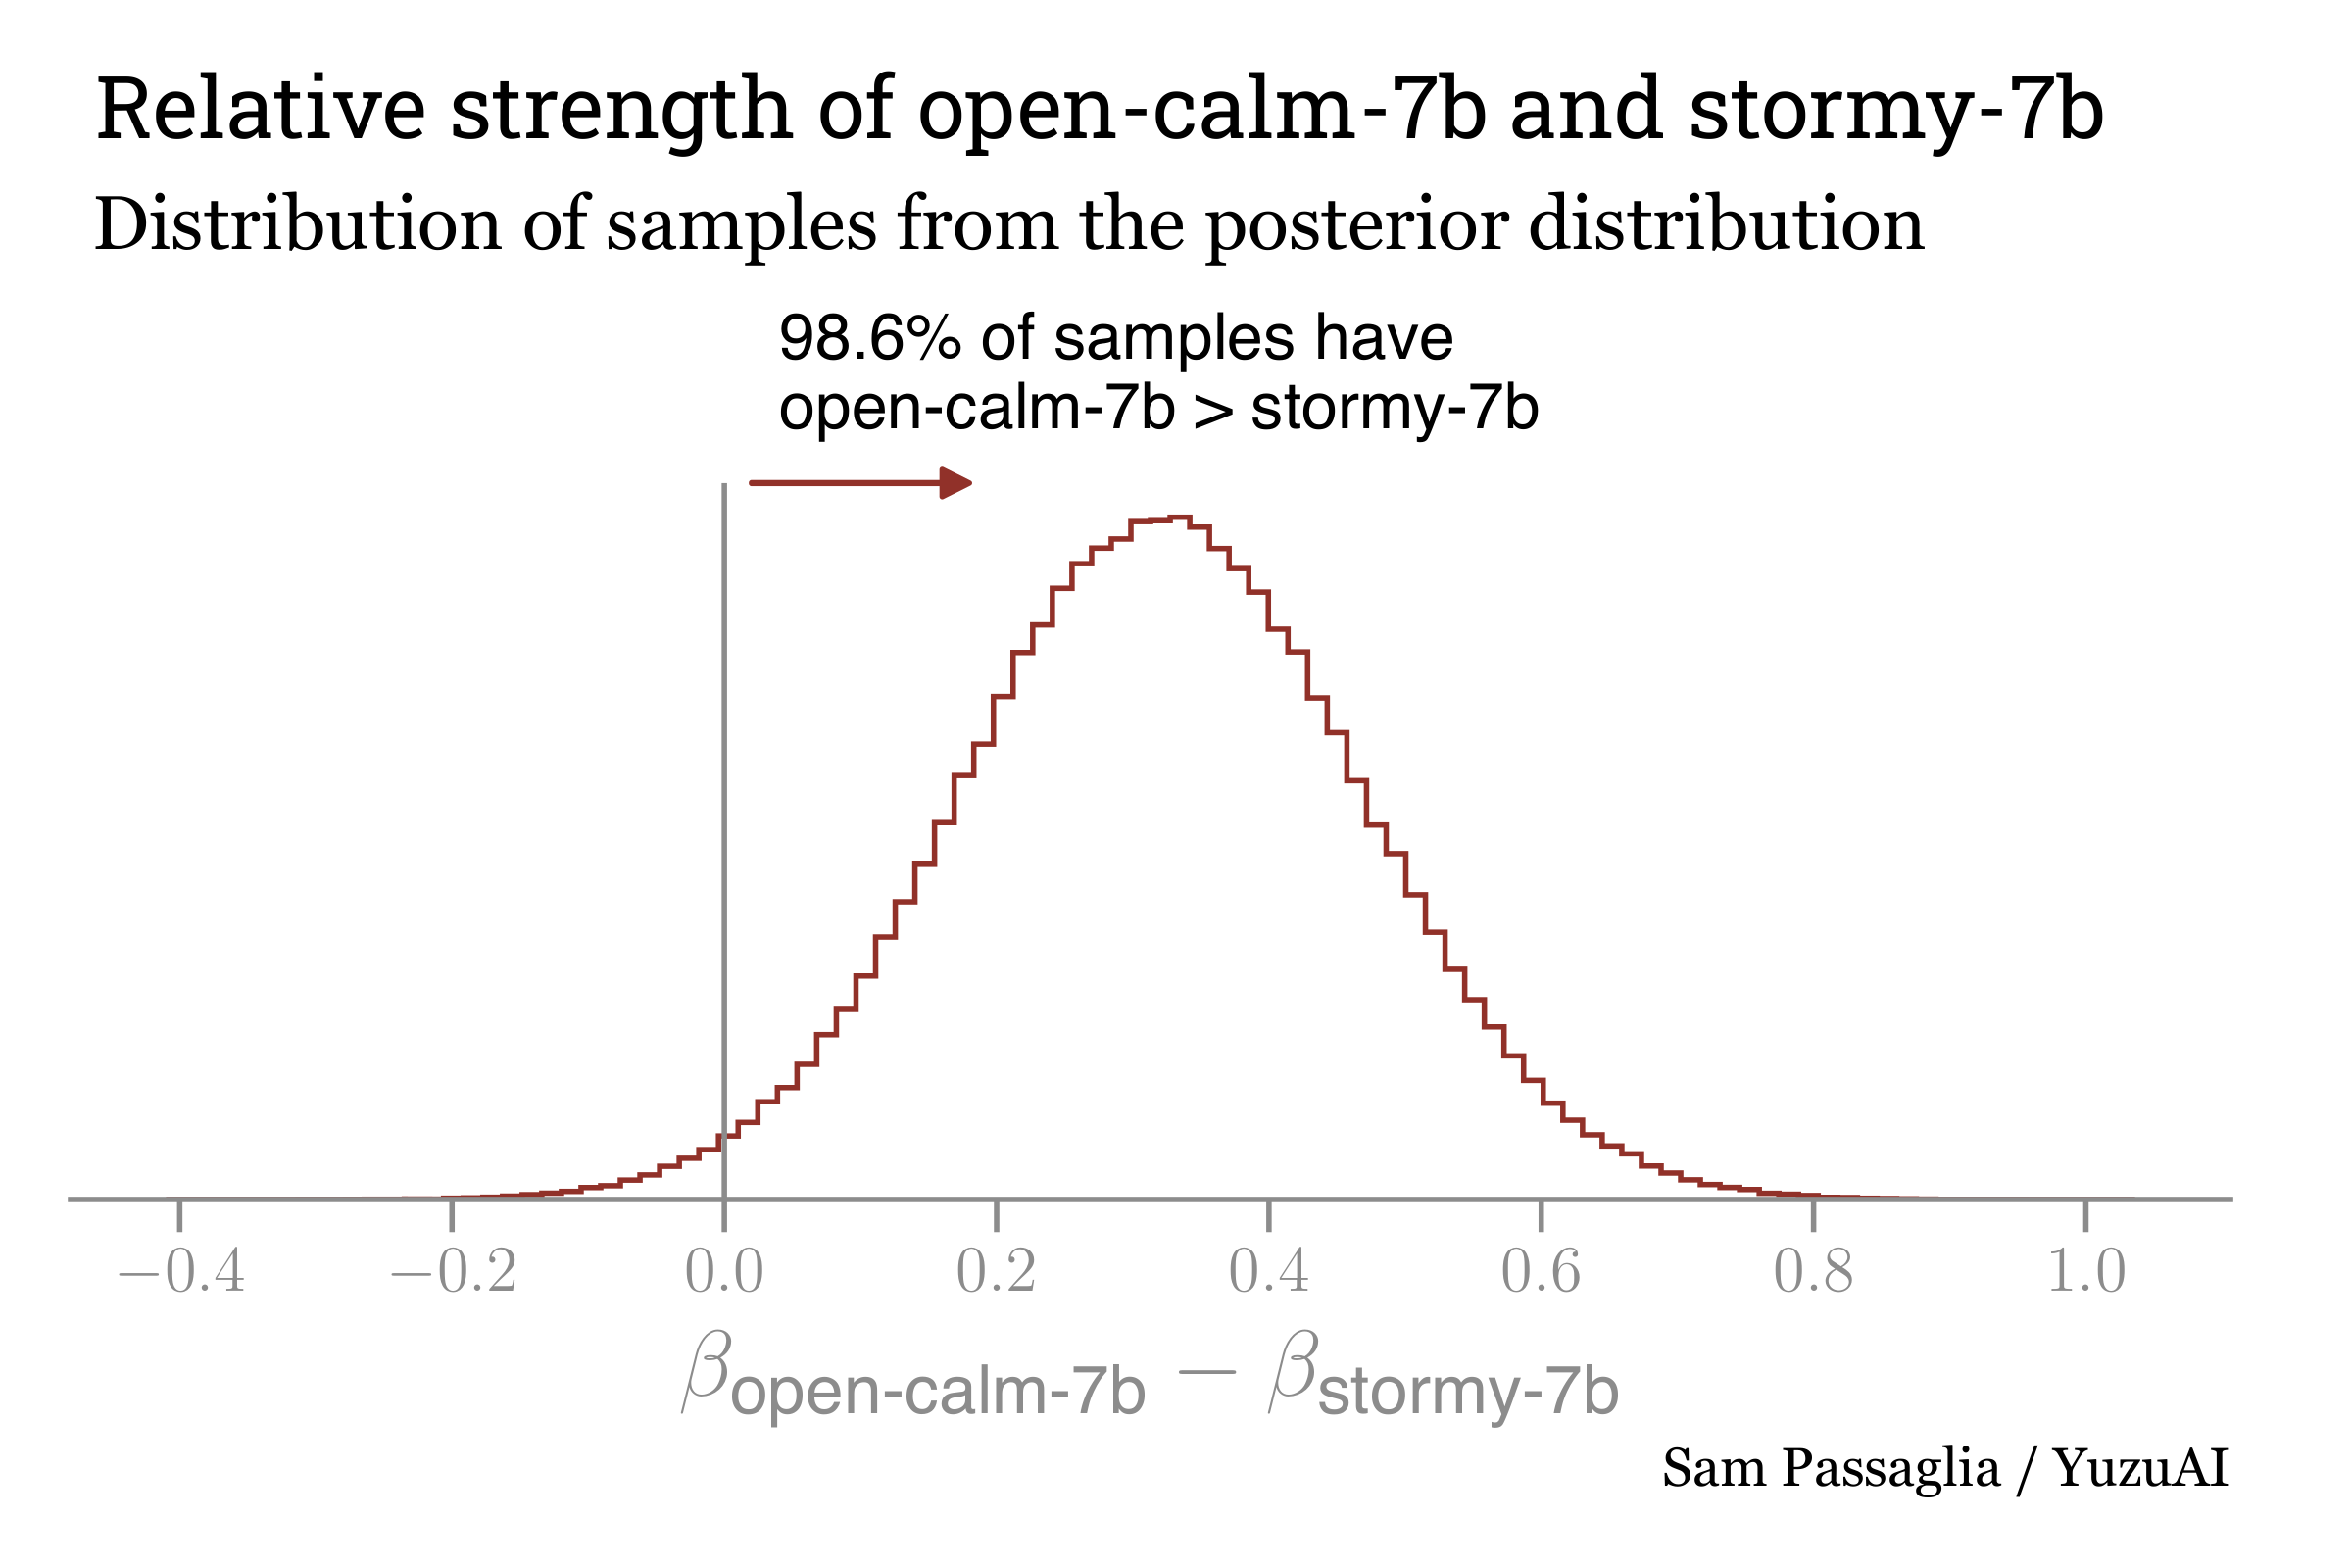 "Relative strength of open-calm-7b and stormy-7b"